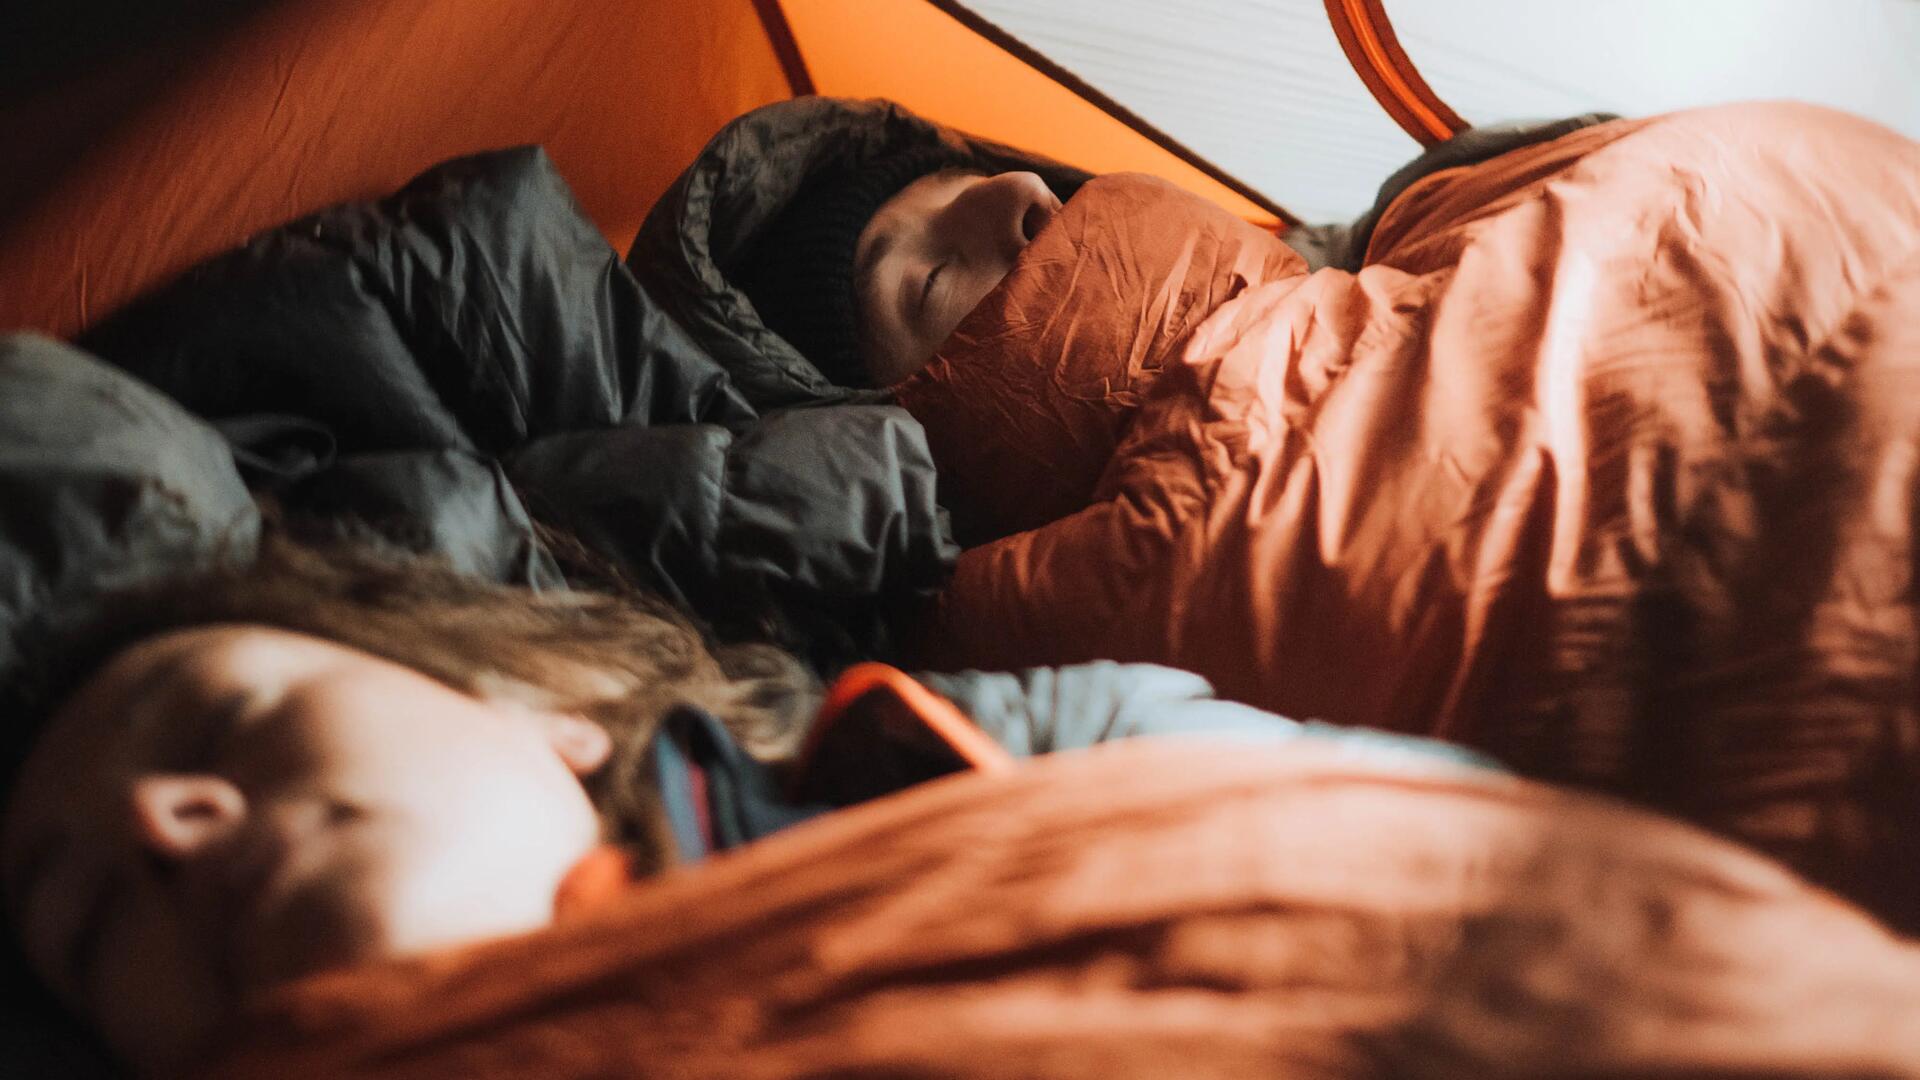 A man and woman tucked in, sleeping in their sleeping bags